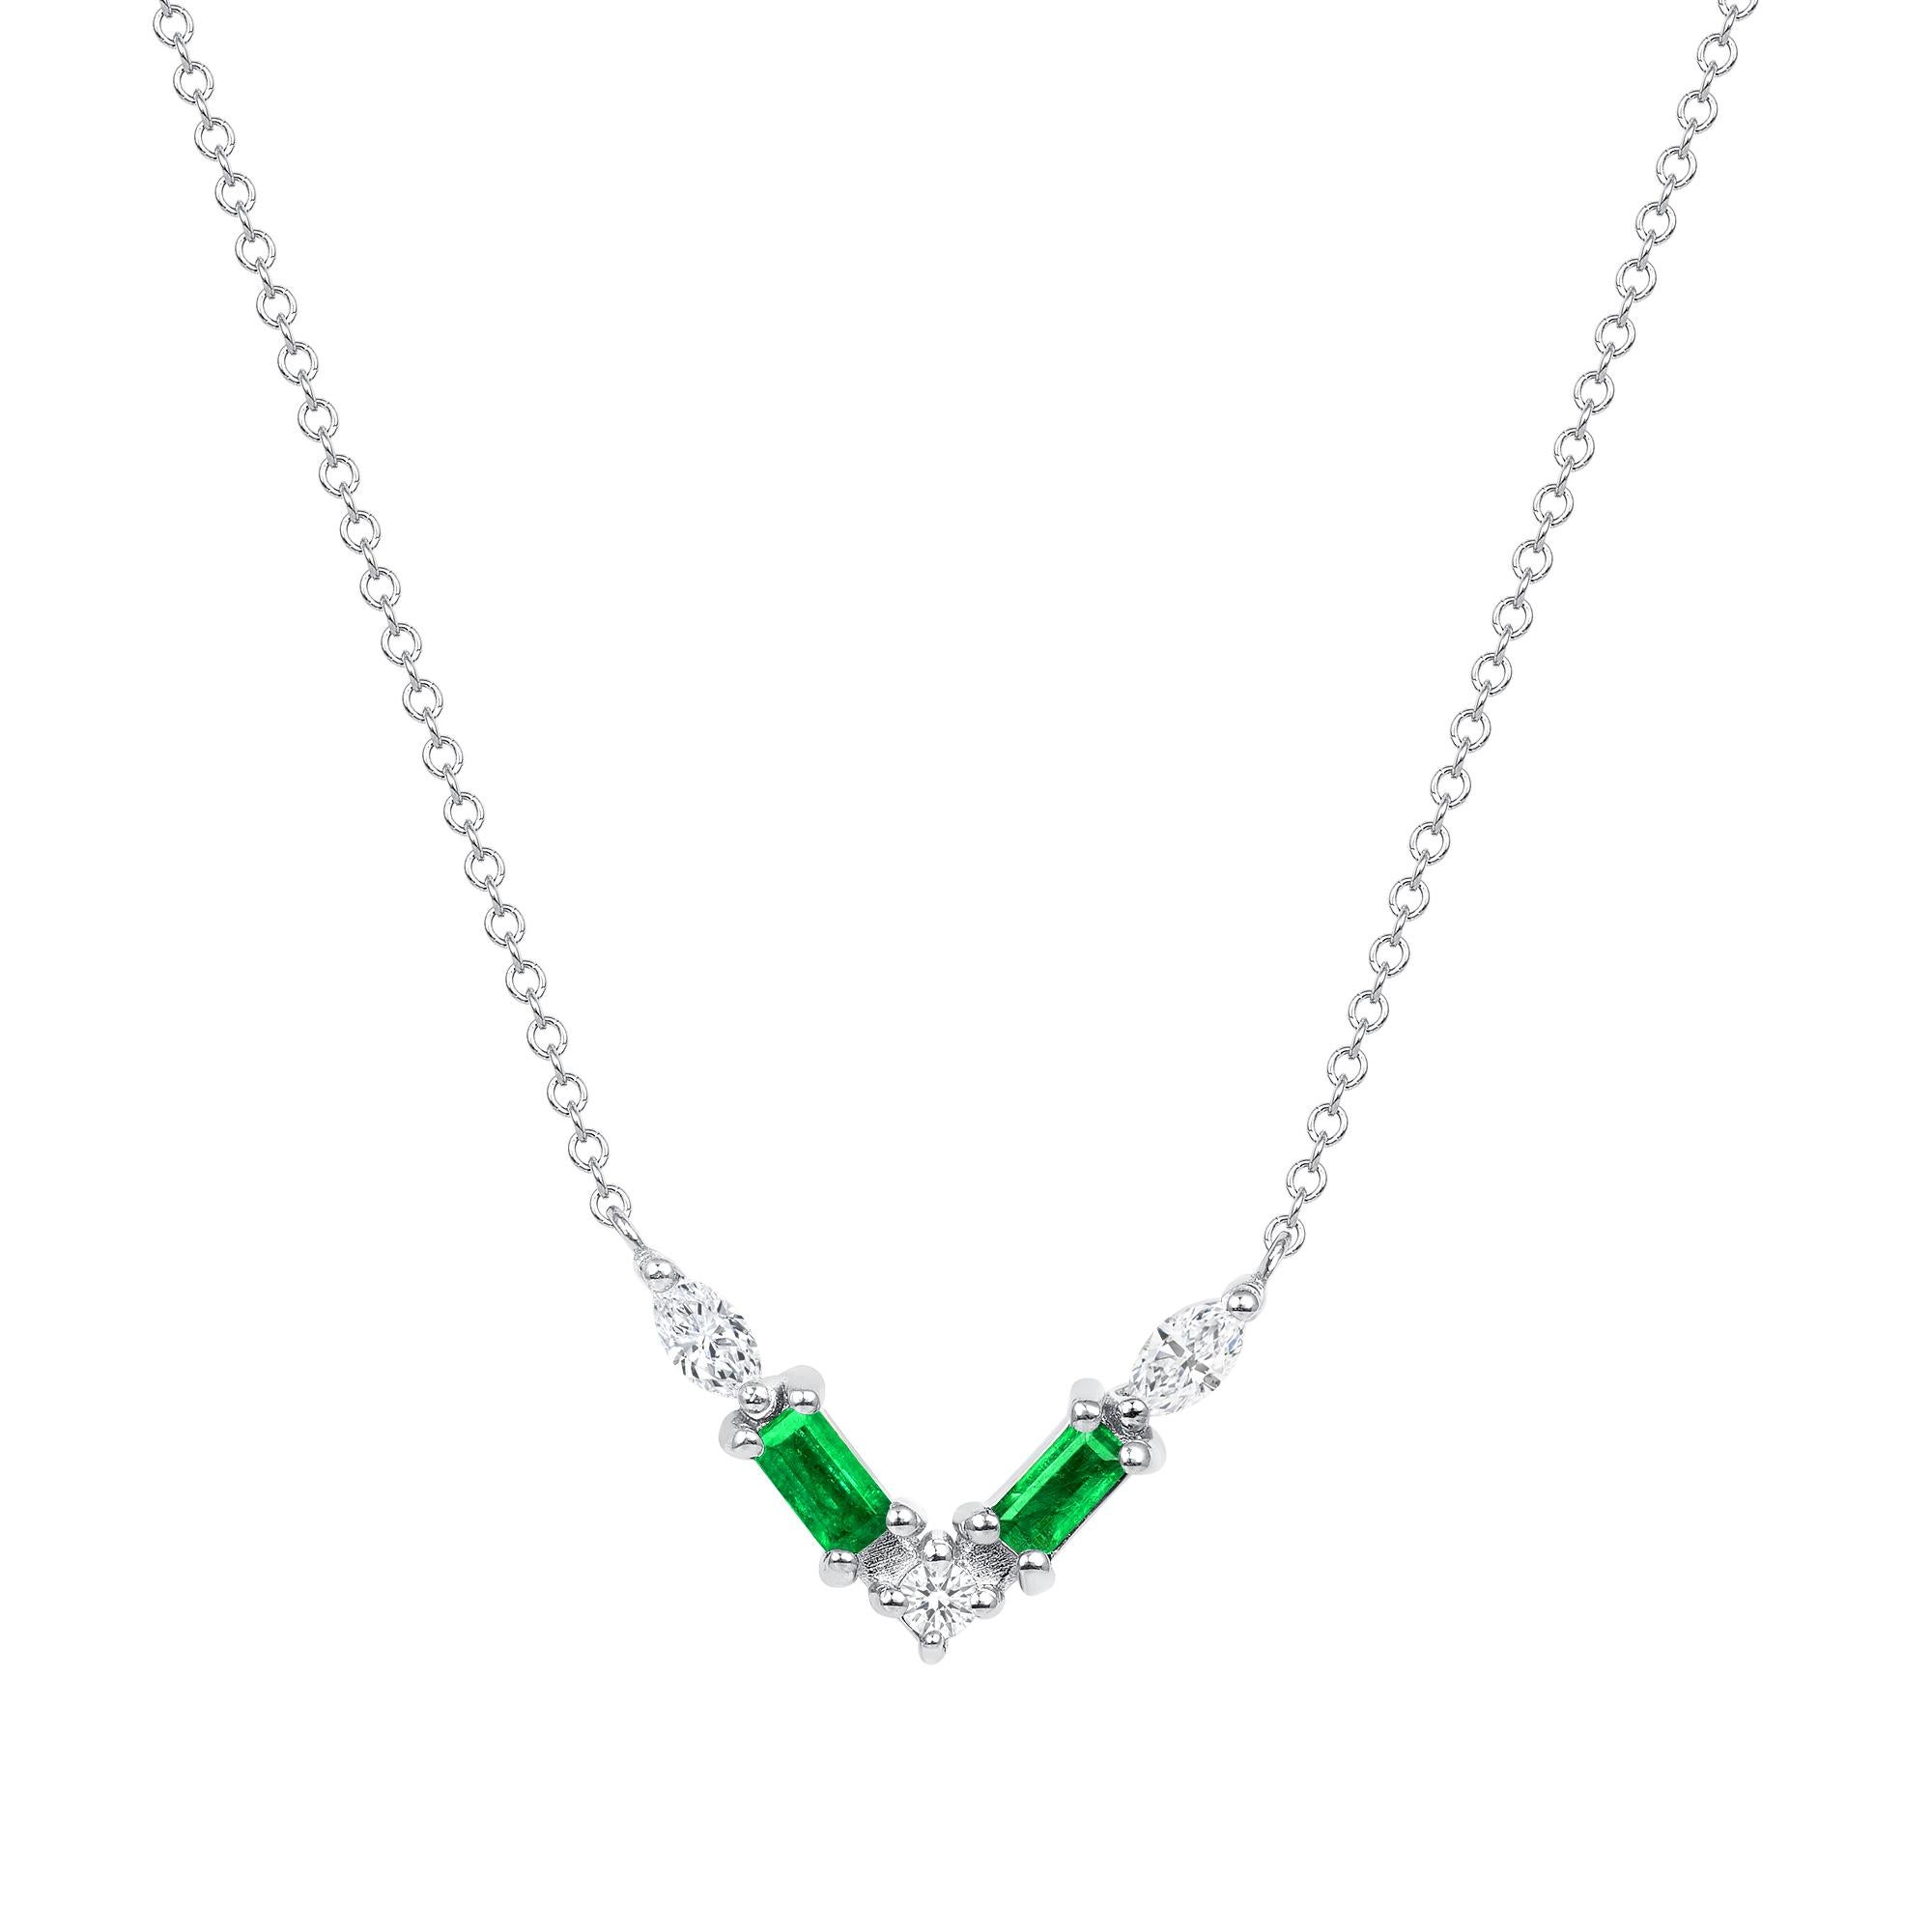 Crafted in 14K gold, this necklace features a thoughtfully arranged collection of emeralds and diamond pavé, elegantly set along a V-shaped plane. Crafted in 14K yellow gold, it exudes delicacy and emotion, showcasing a captivating color palette.